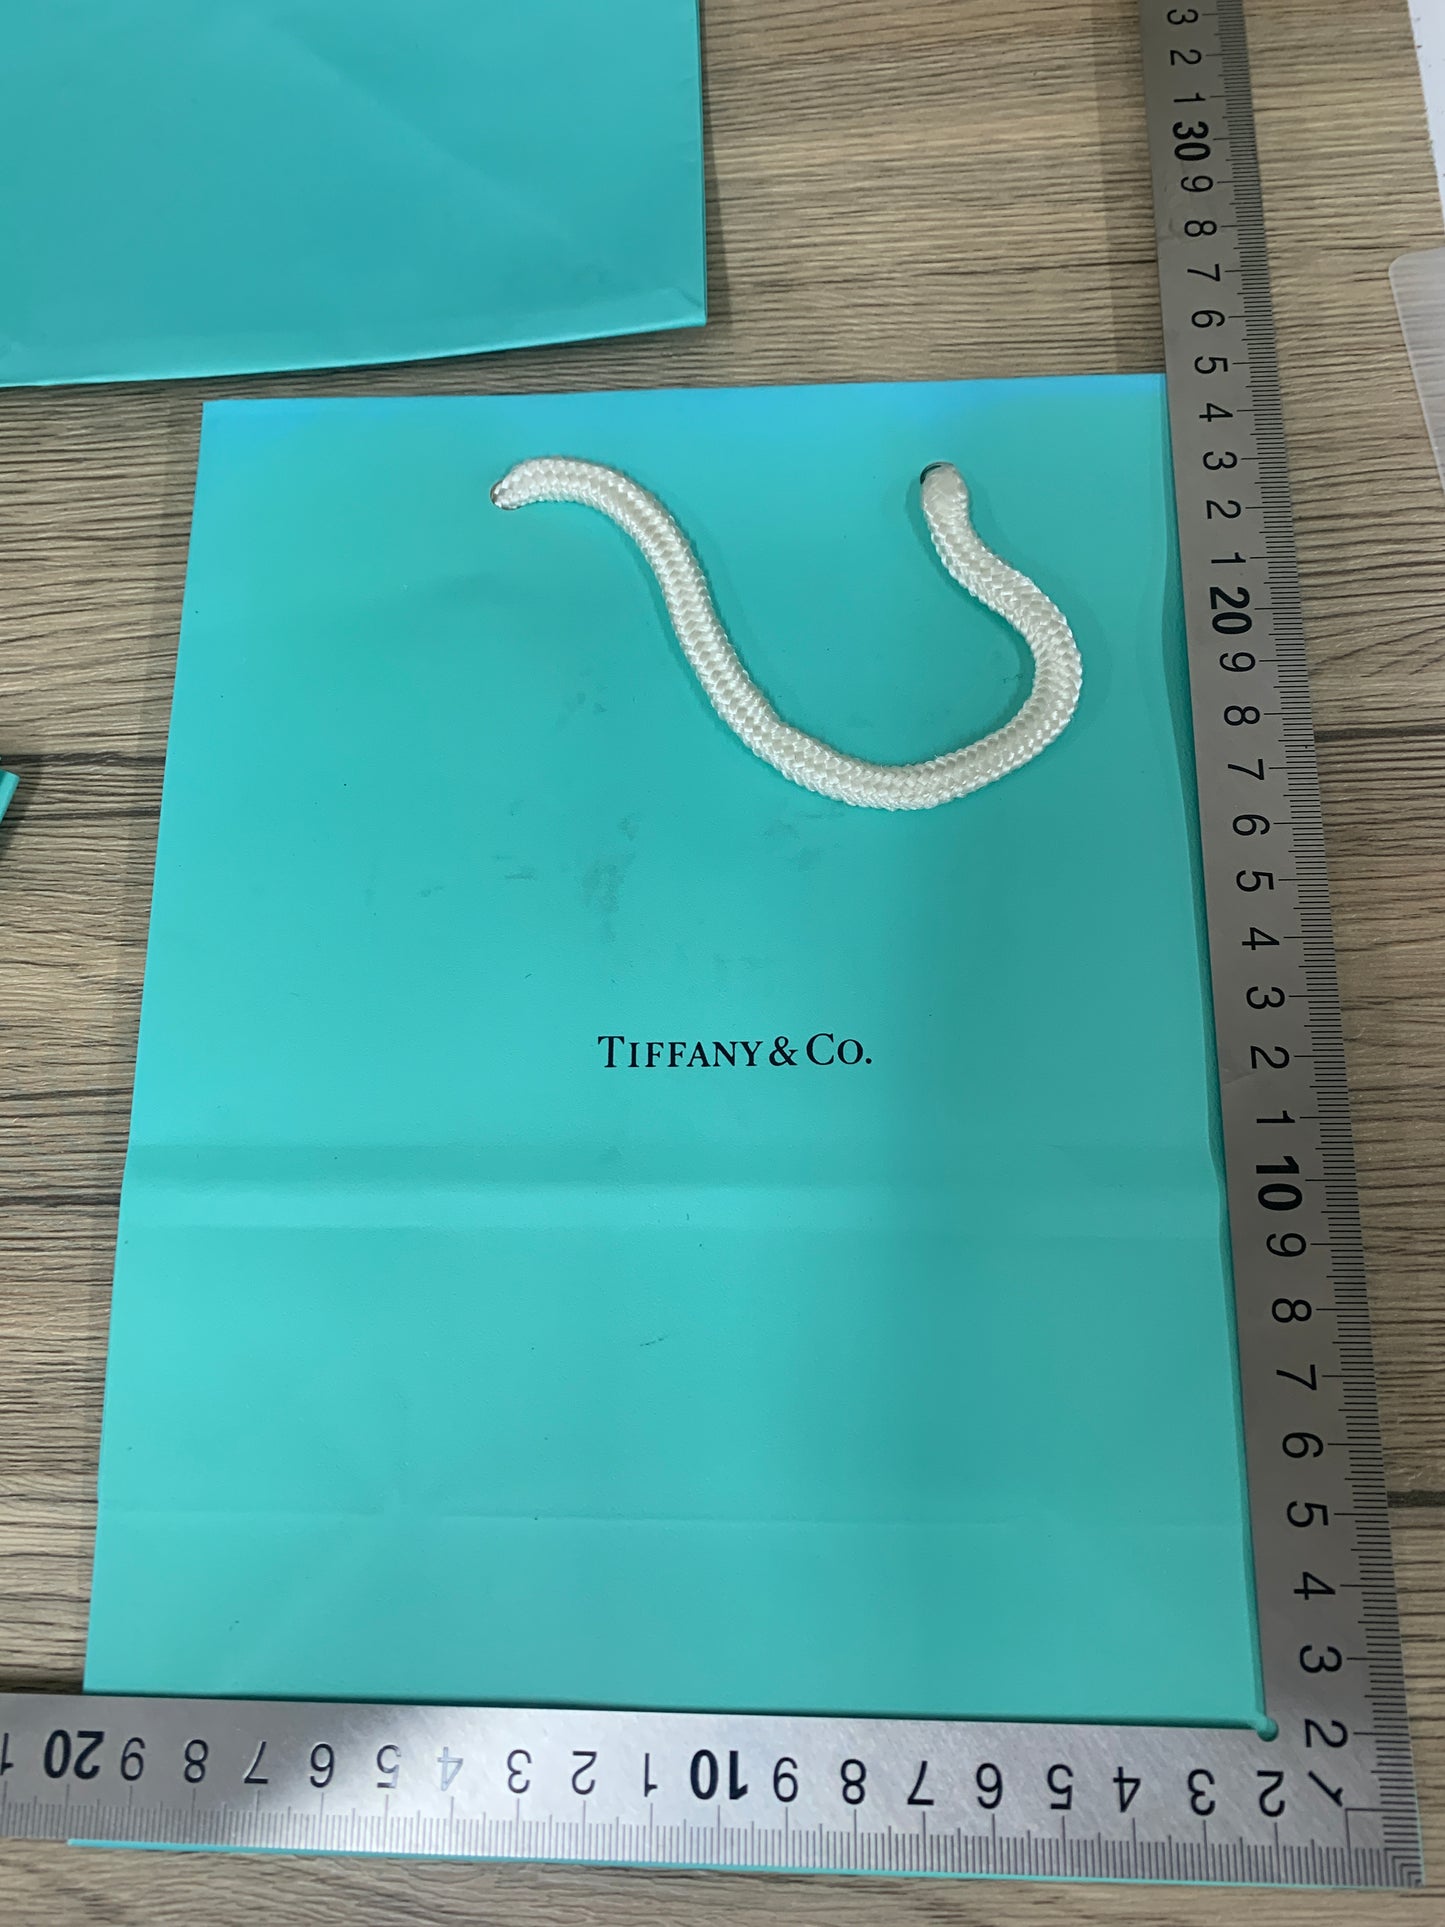 Used Tiffany Co. Gift paper bag set for jewelry  wallet 4 paper bag set